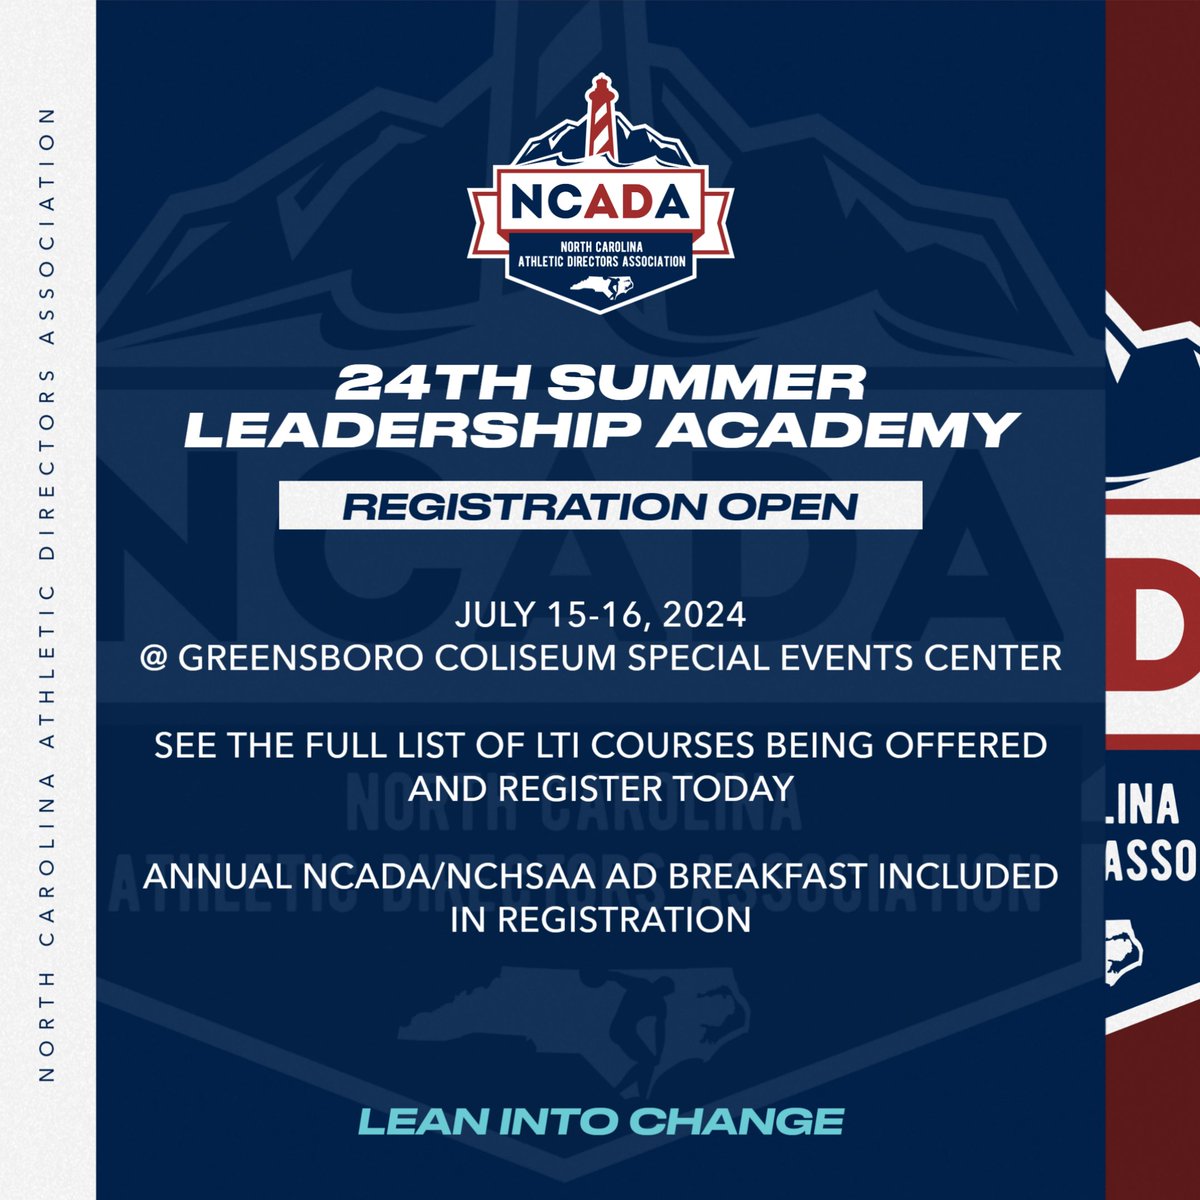 Registration is now open for our 24th Summer Leadership Academy this July 15-16 in Greensboro! Check out the slate of LTI Courses being offered register soon! ncada.net/summer-leaders…